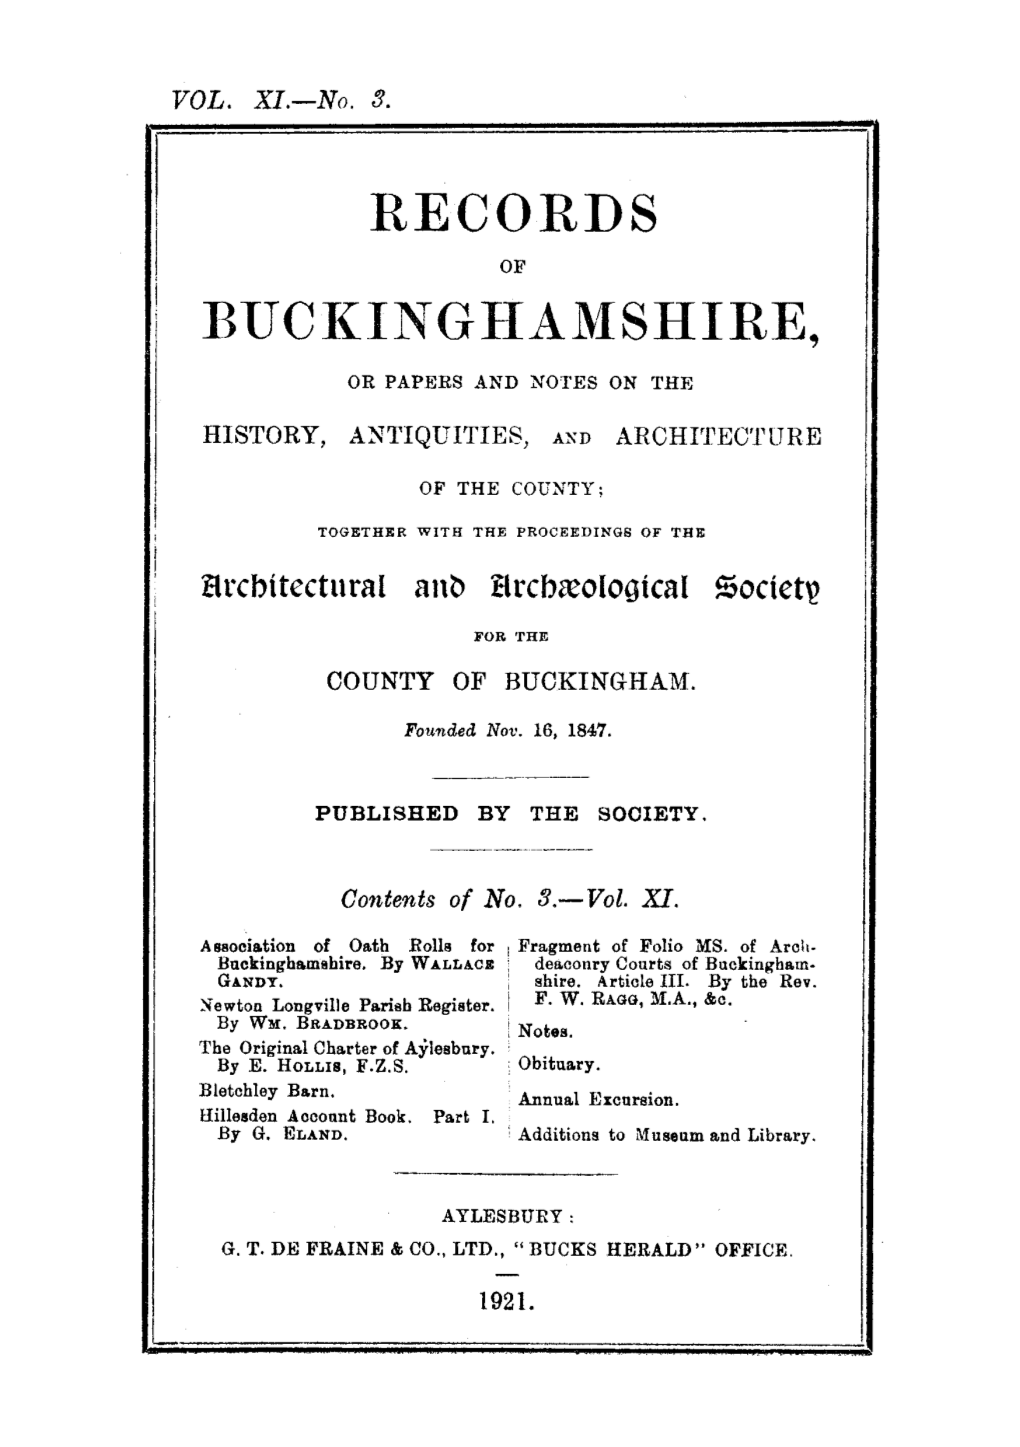 RECORDS BUCKINGHAMSHIRE, Architectural and Archaeological